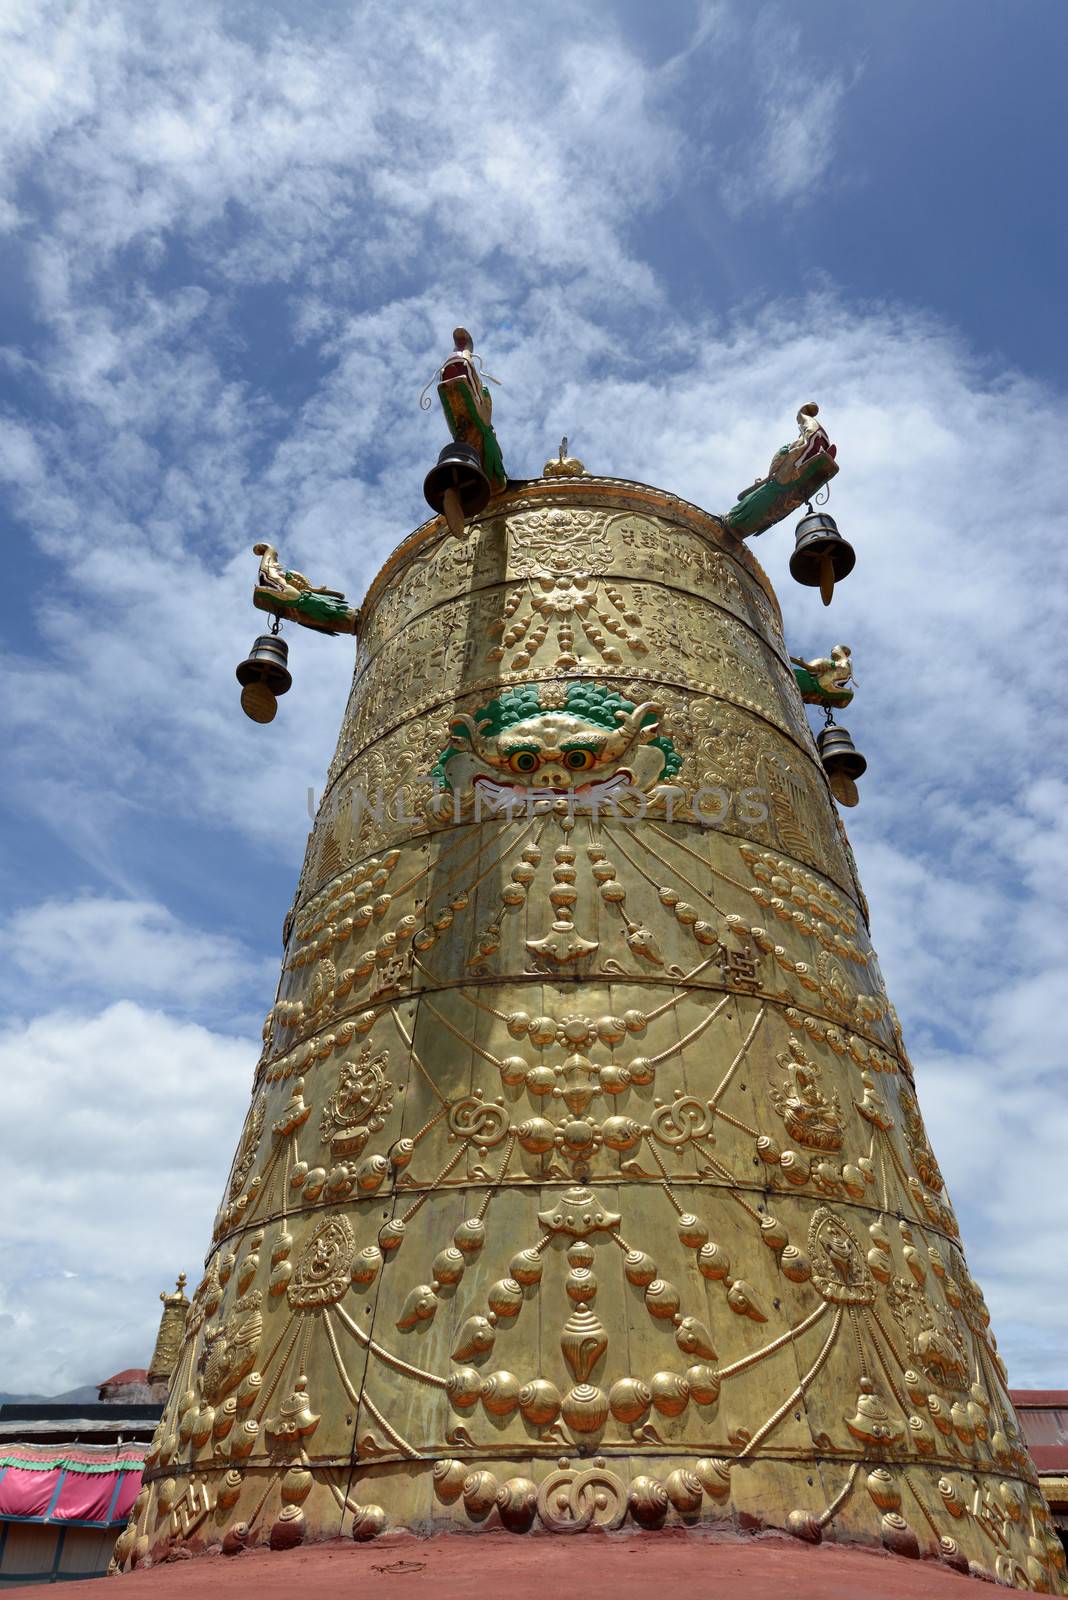 Landmark of Golden roof of a lamasery in Lhasa,Tibet